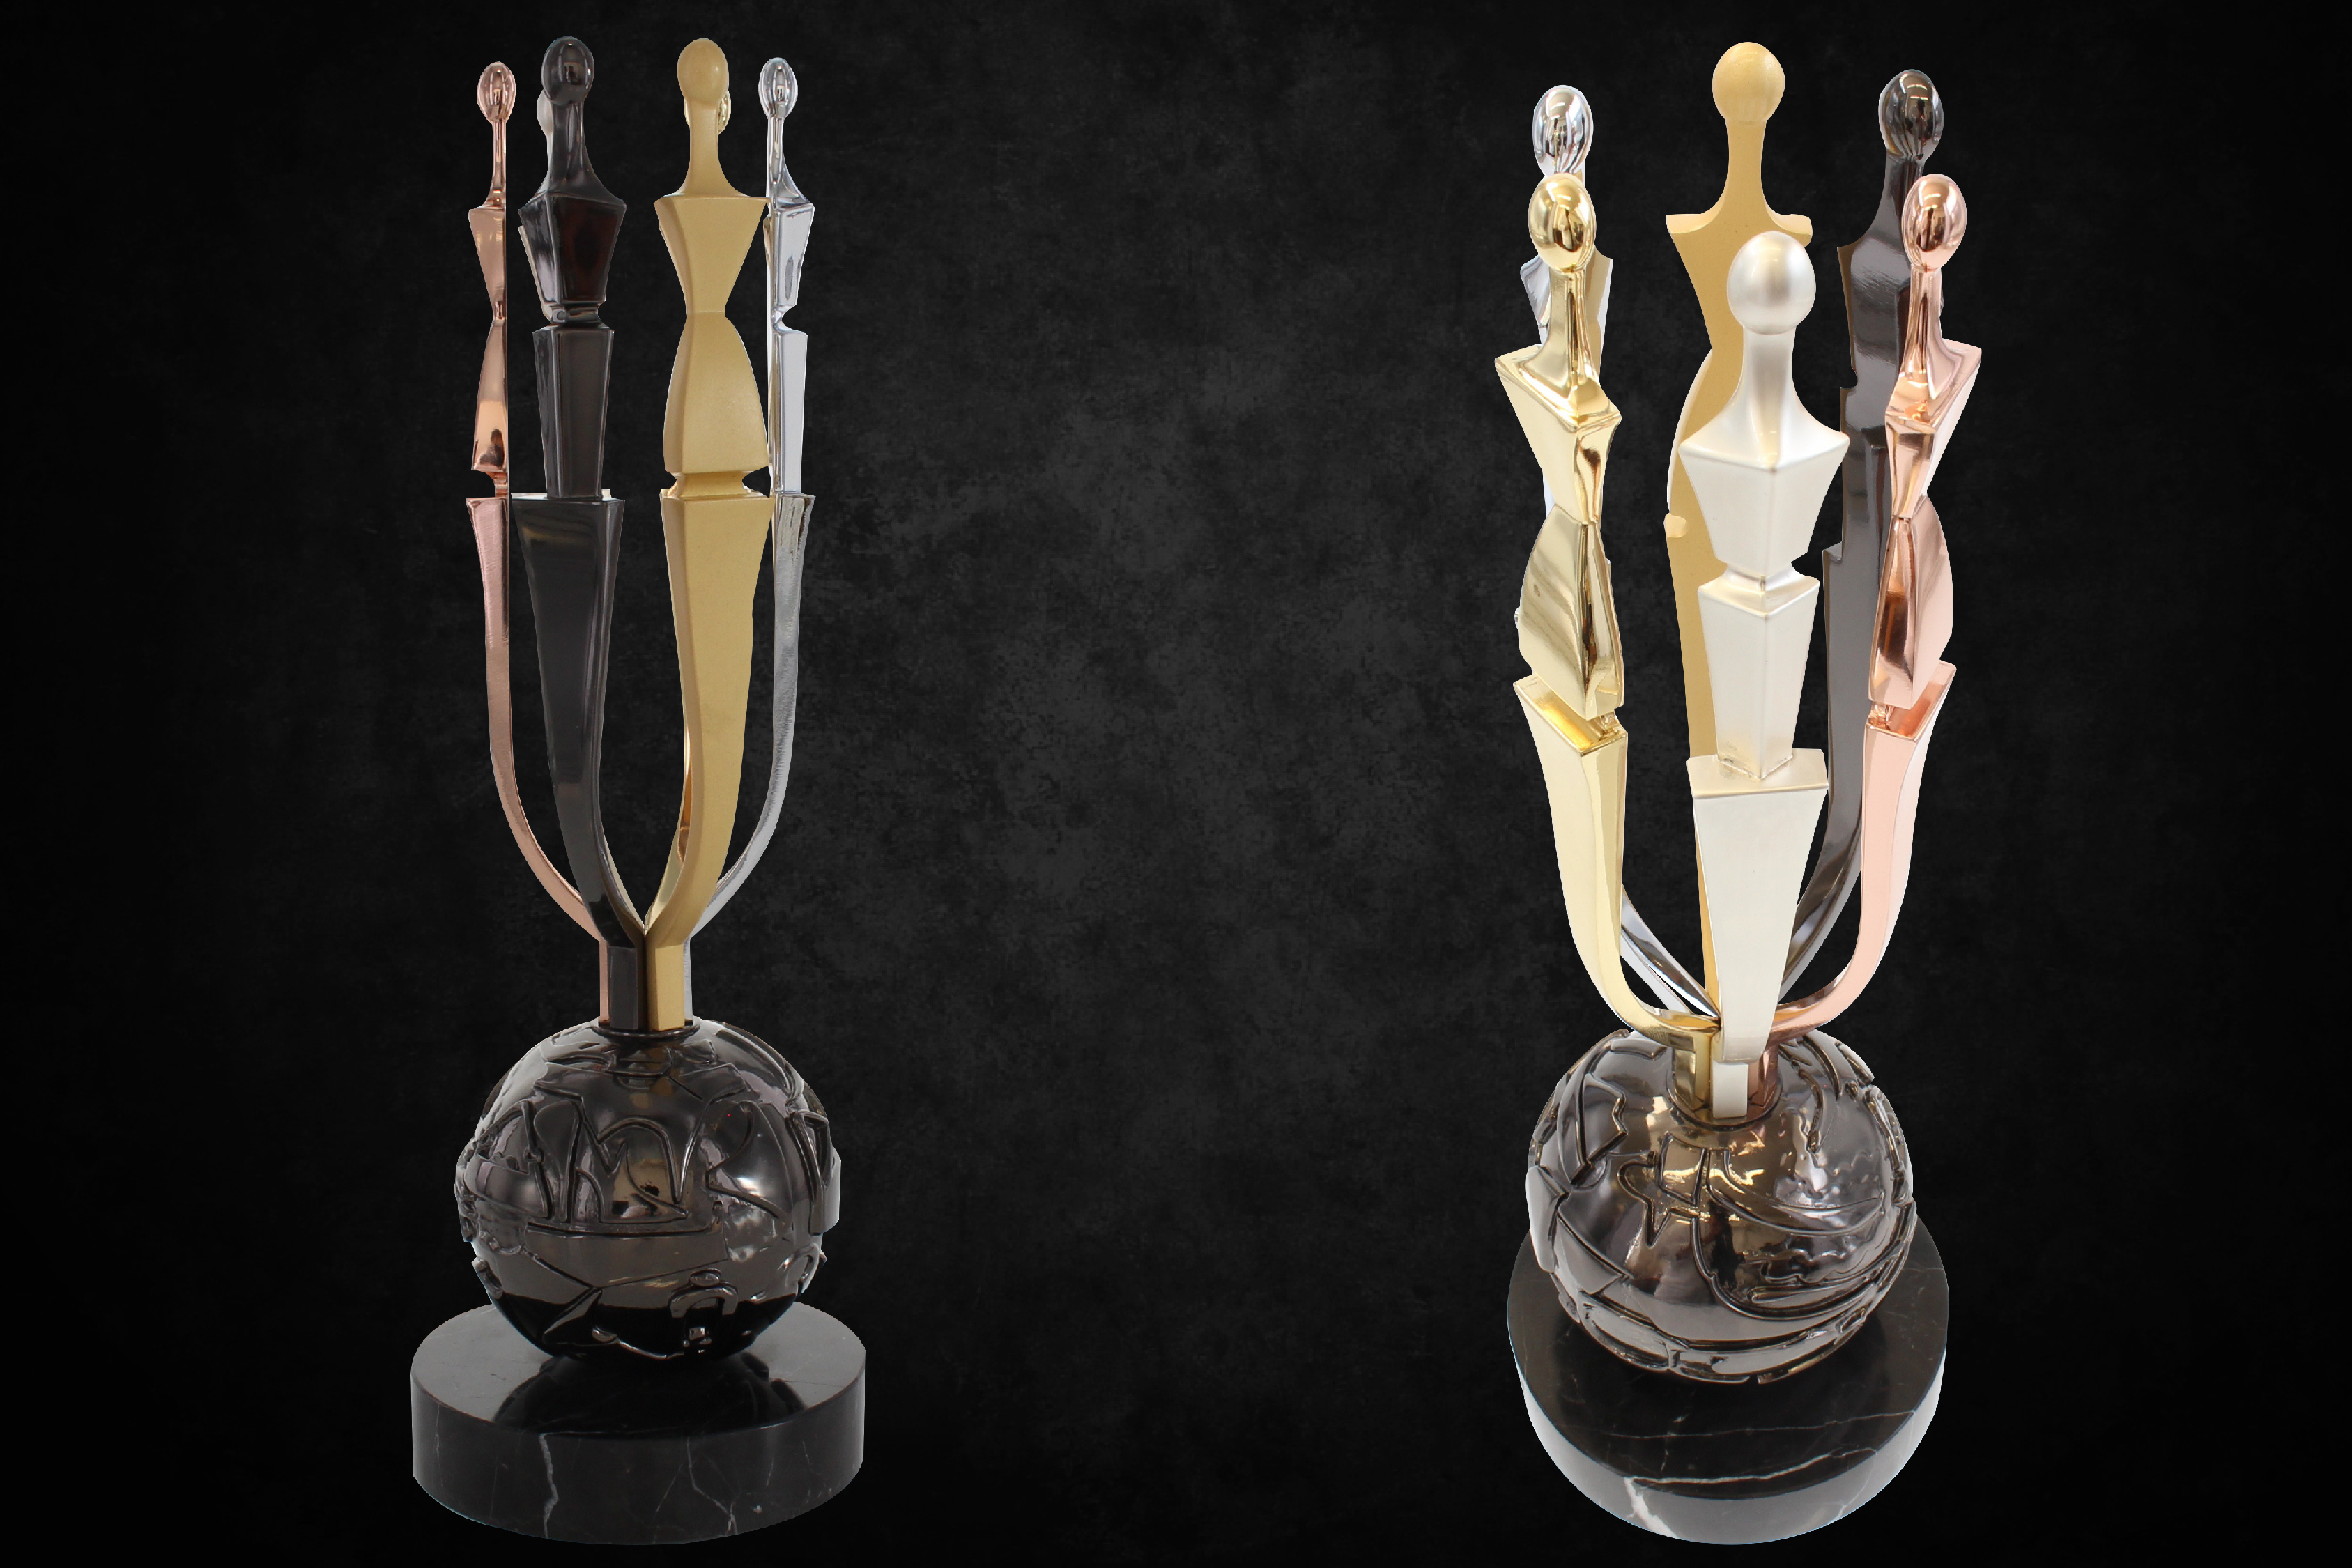 AAFA American Image Awards trophy, a marble base with a black chrome globe, 6 abstact figures emerging from the top